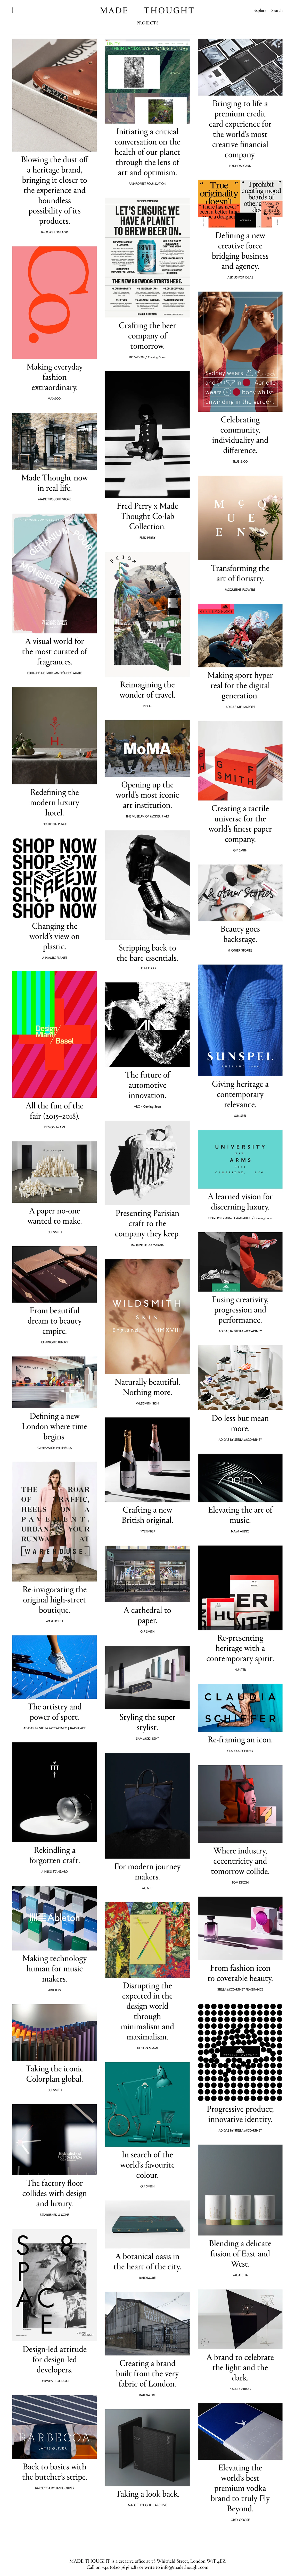 Made Thought Landing Page Example: We are a creative office that believes in heartfelt strategy and exquisite visual craft to create brands, products and experiences that people fall in love with. Simple ideas, effortlessly beautiful, that appeal to the head and the heart.